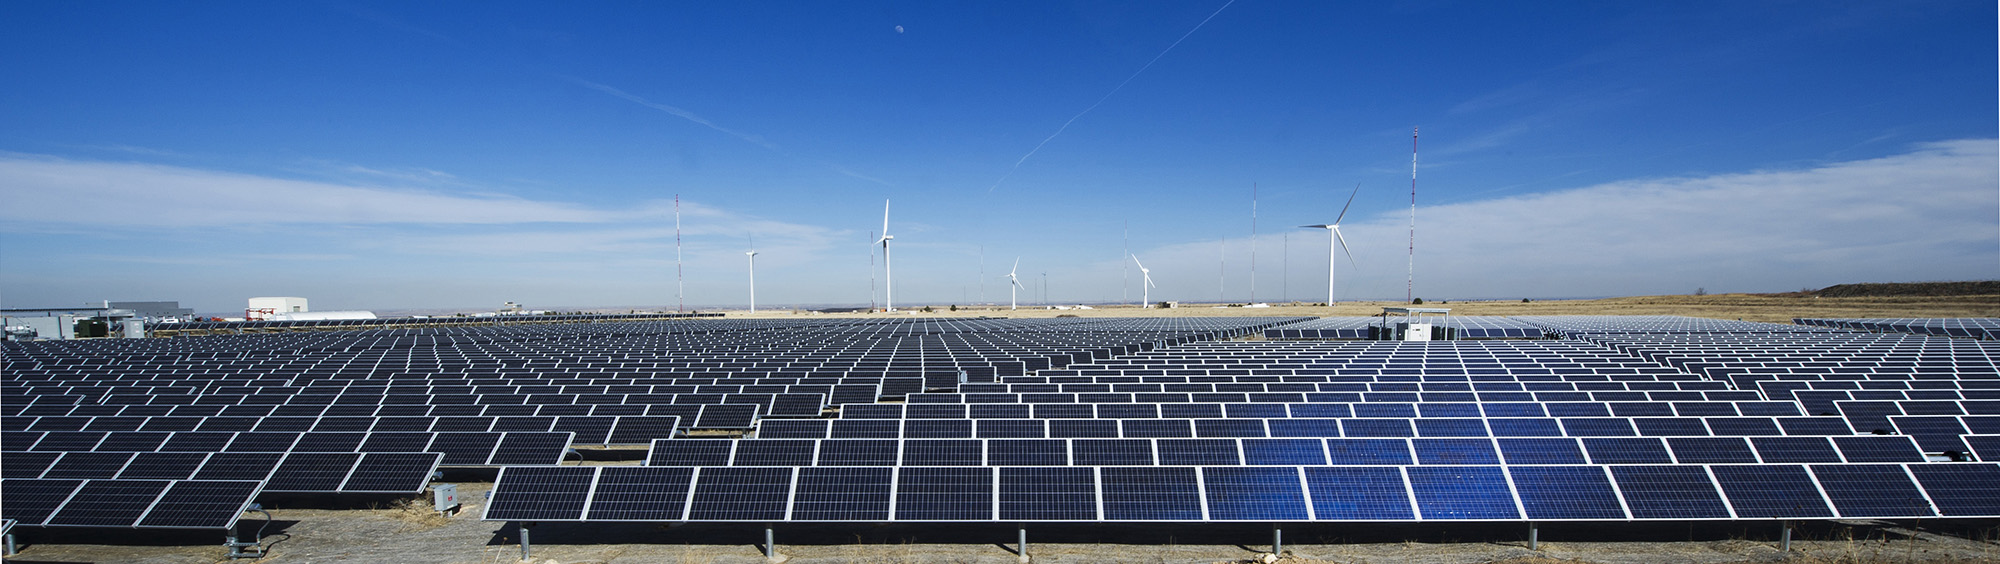 March 14, 2011-Photovoltaic field at the National Wind Technology Center.(Photo by Dennis Schroeder)